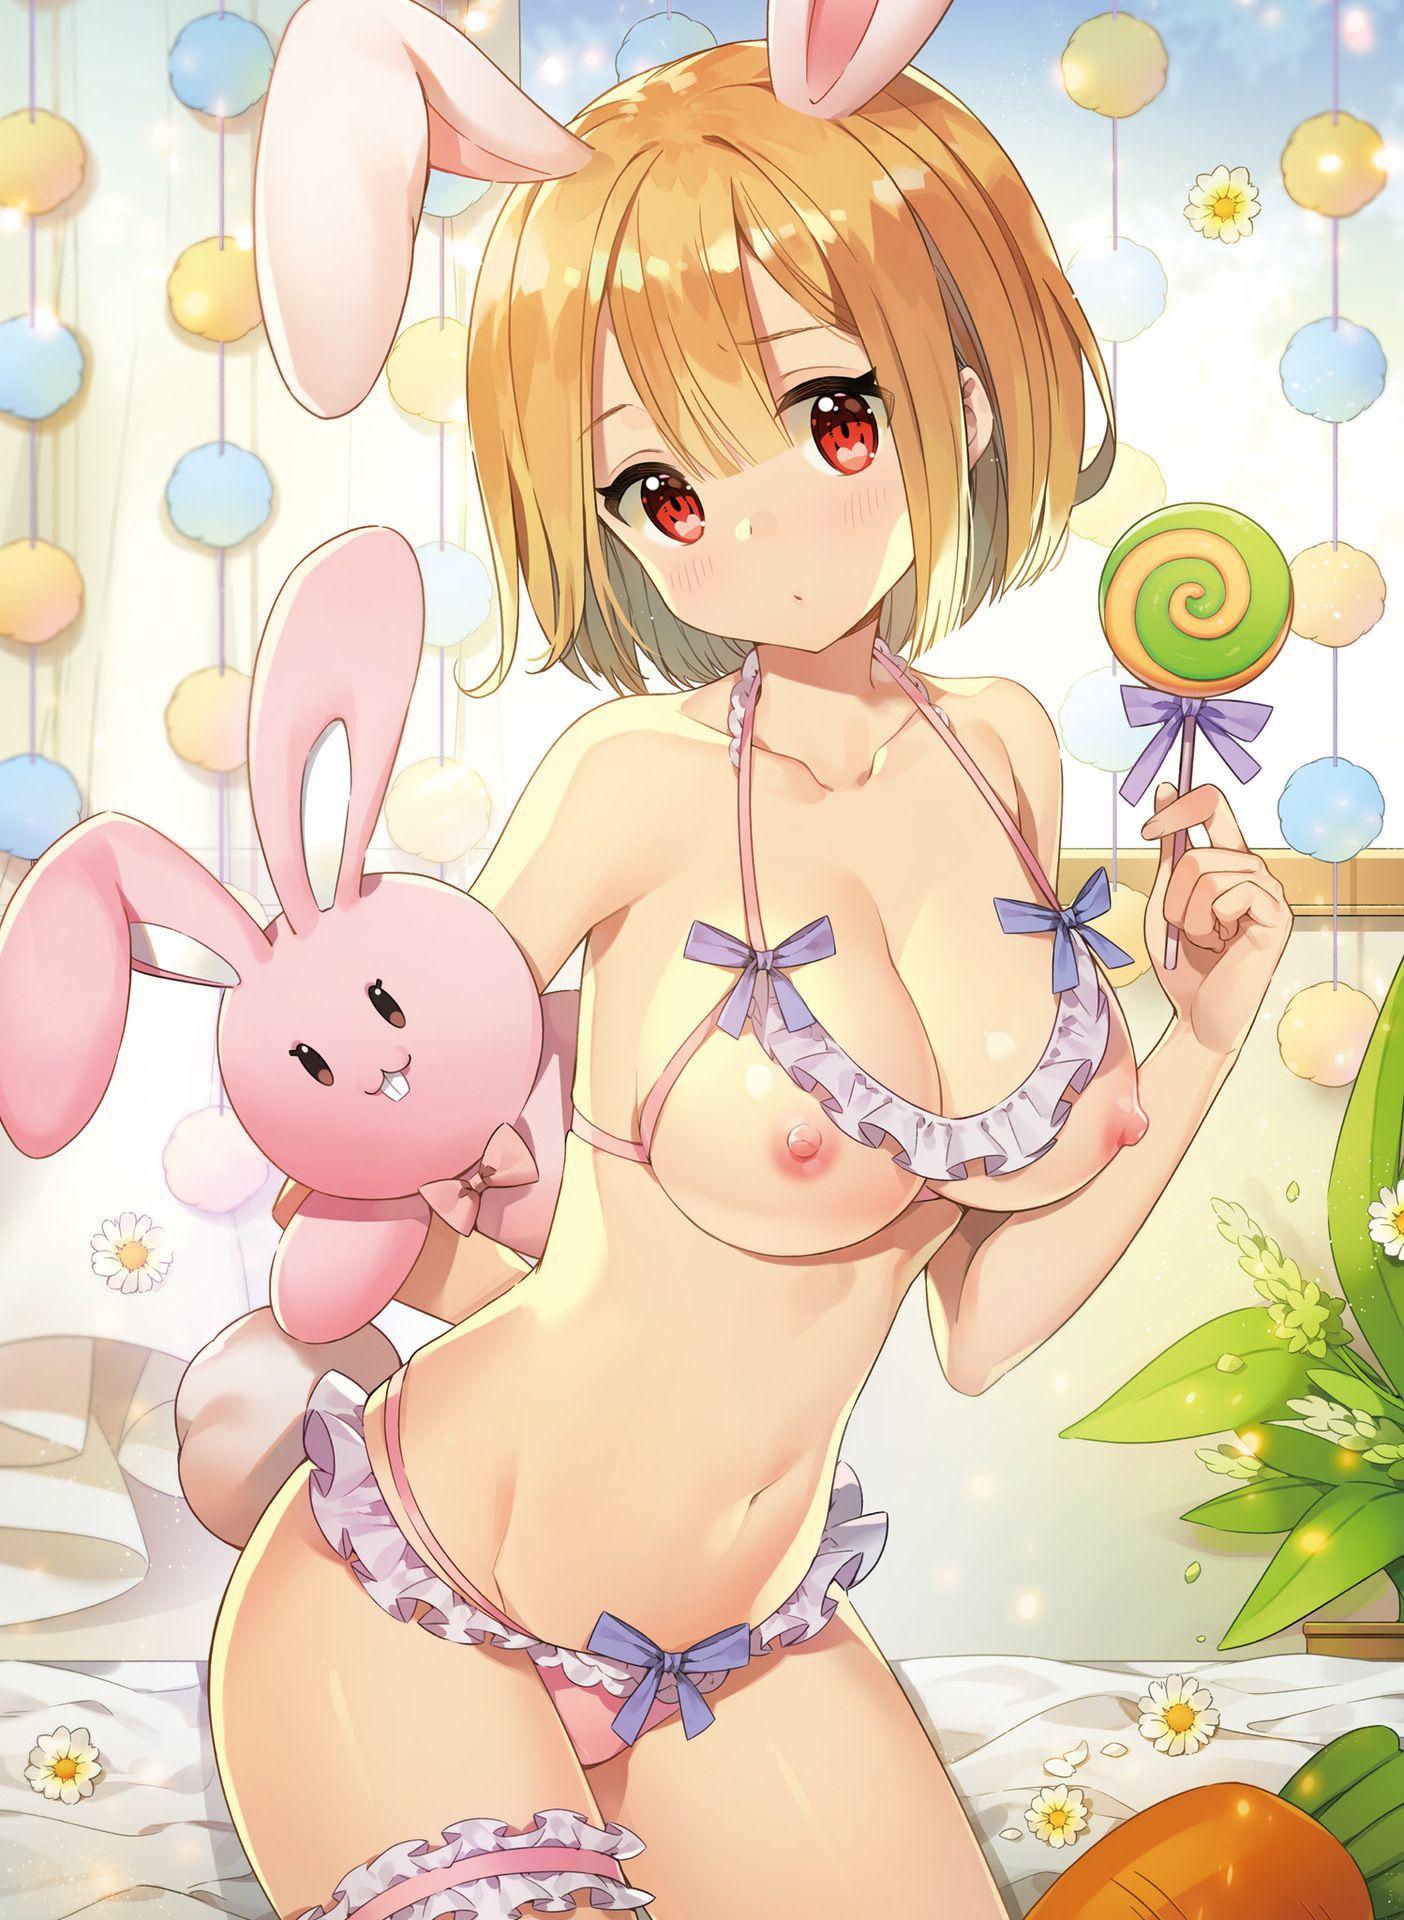 Secondary erotic images of girls wearing erotic underwear and costumes [2nd edition] 20 [Naughty Shitagi] 5